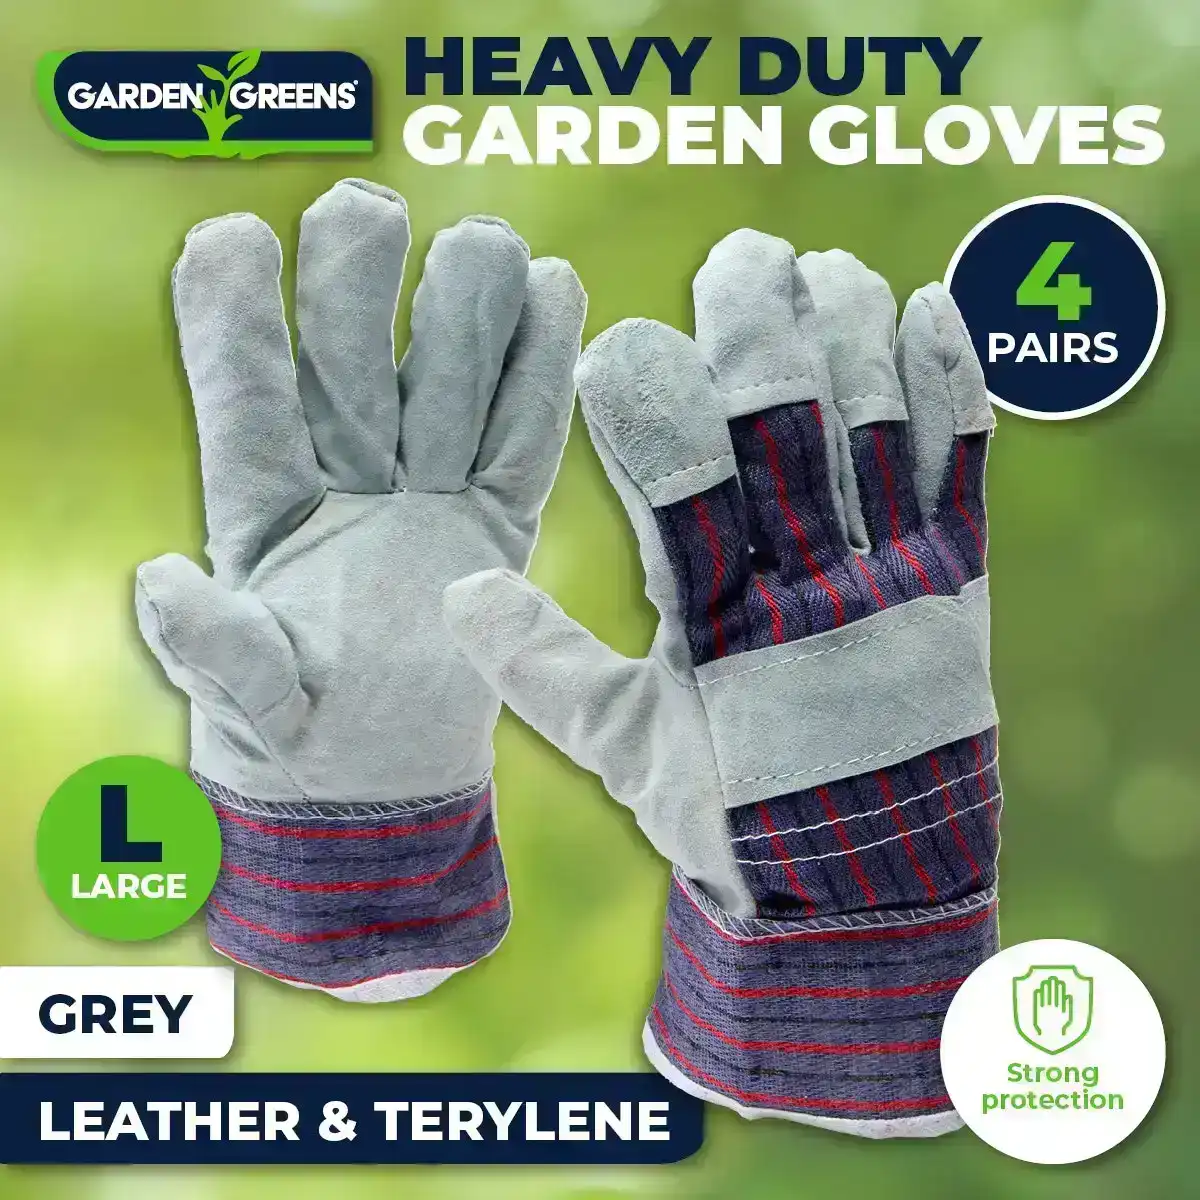 Garden Greens® 4 Pairs Garden Gloves Grey Durable Leather Comfortable Adult Size